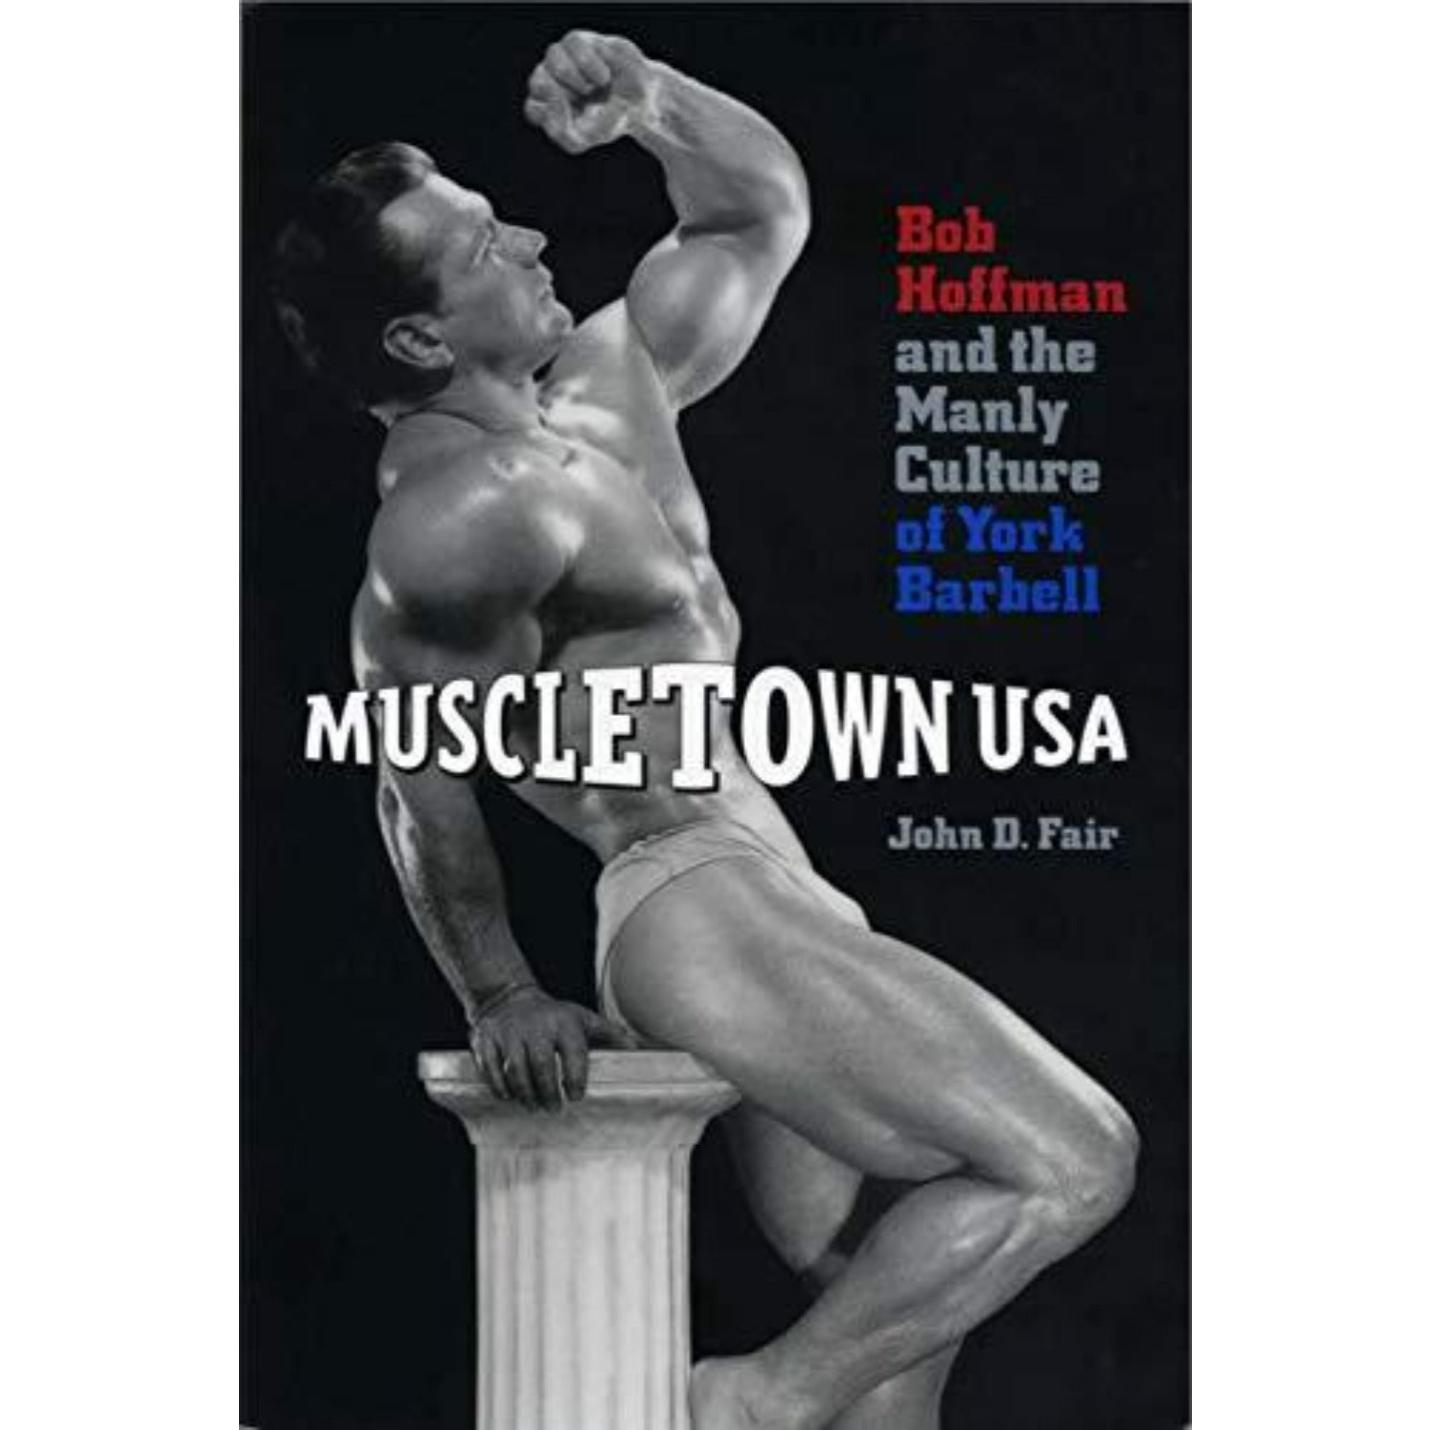 John D Fair: Muscletown USA: Bob Hoffman and the Manly Culture of York Barbell (Engels) (Paperback) - happygetfit.com